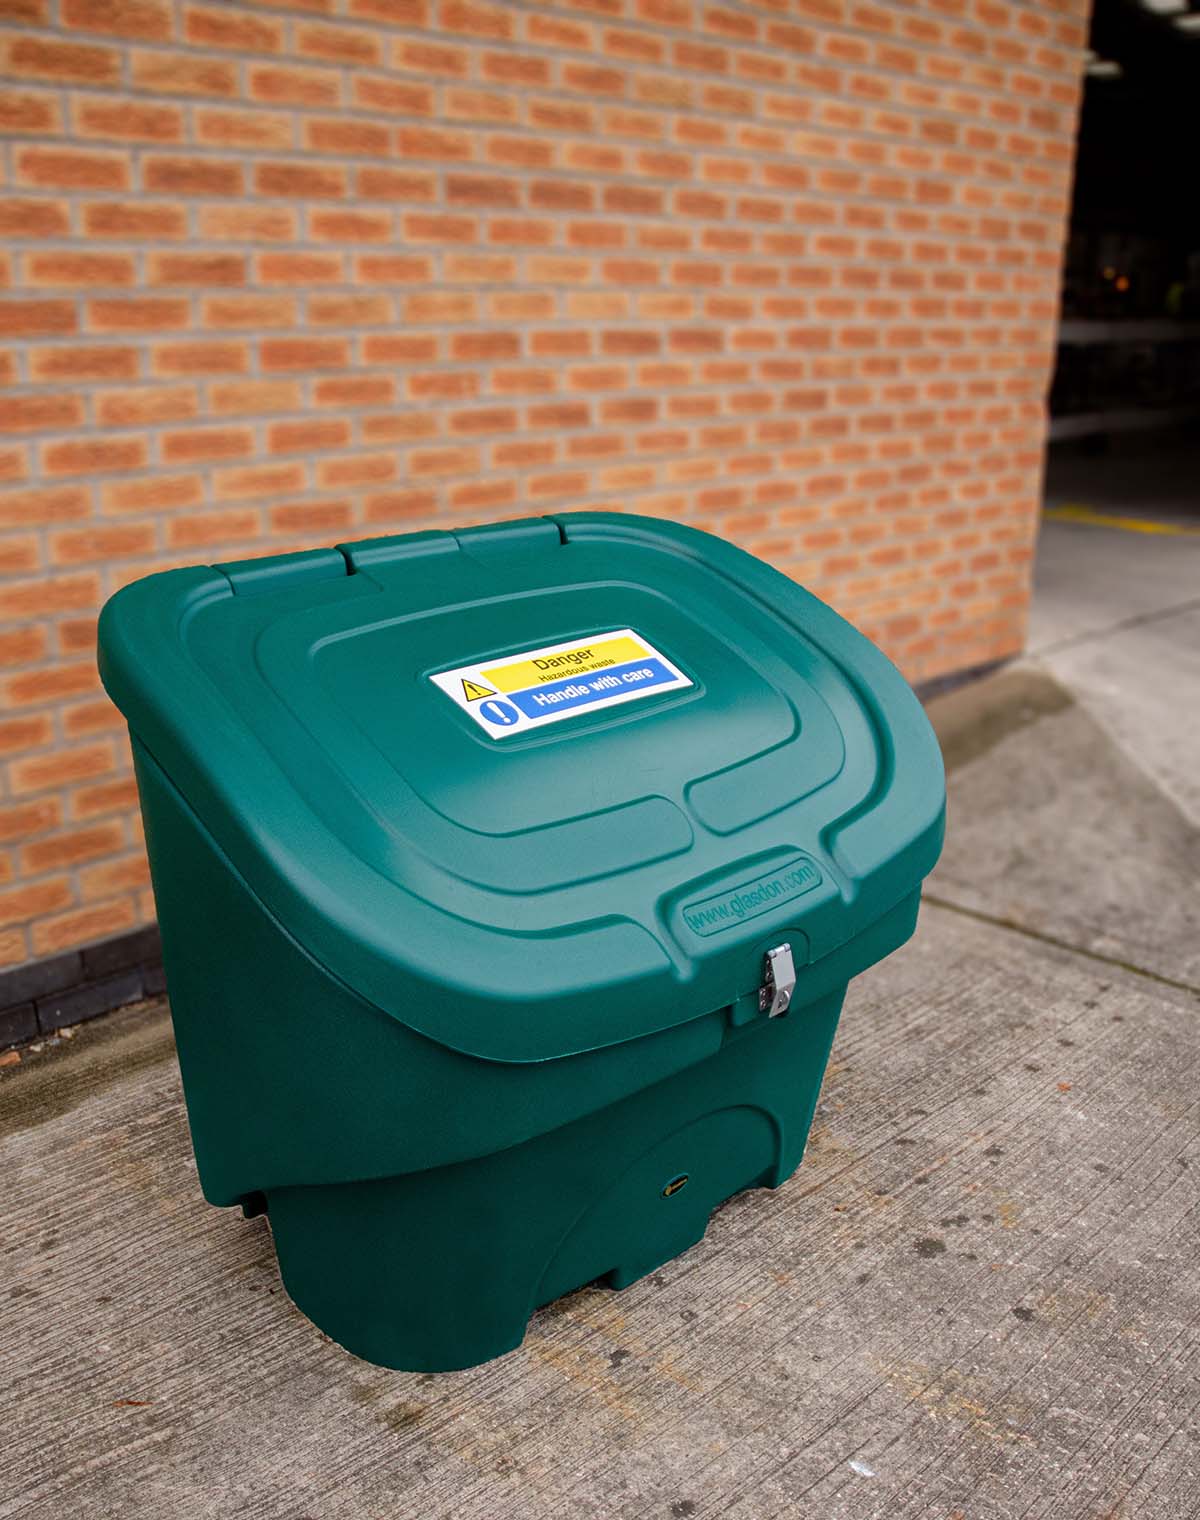 Nestor™ 400 Grit Bin with personalised front graphic